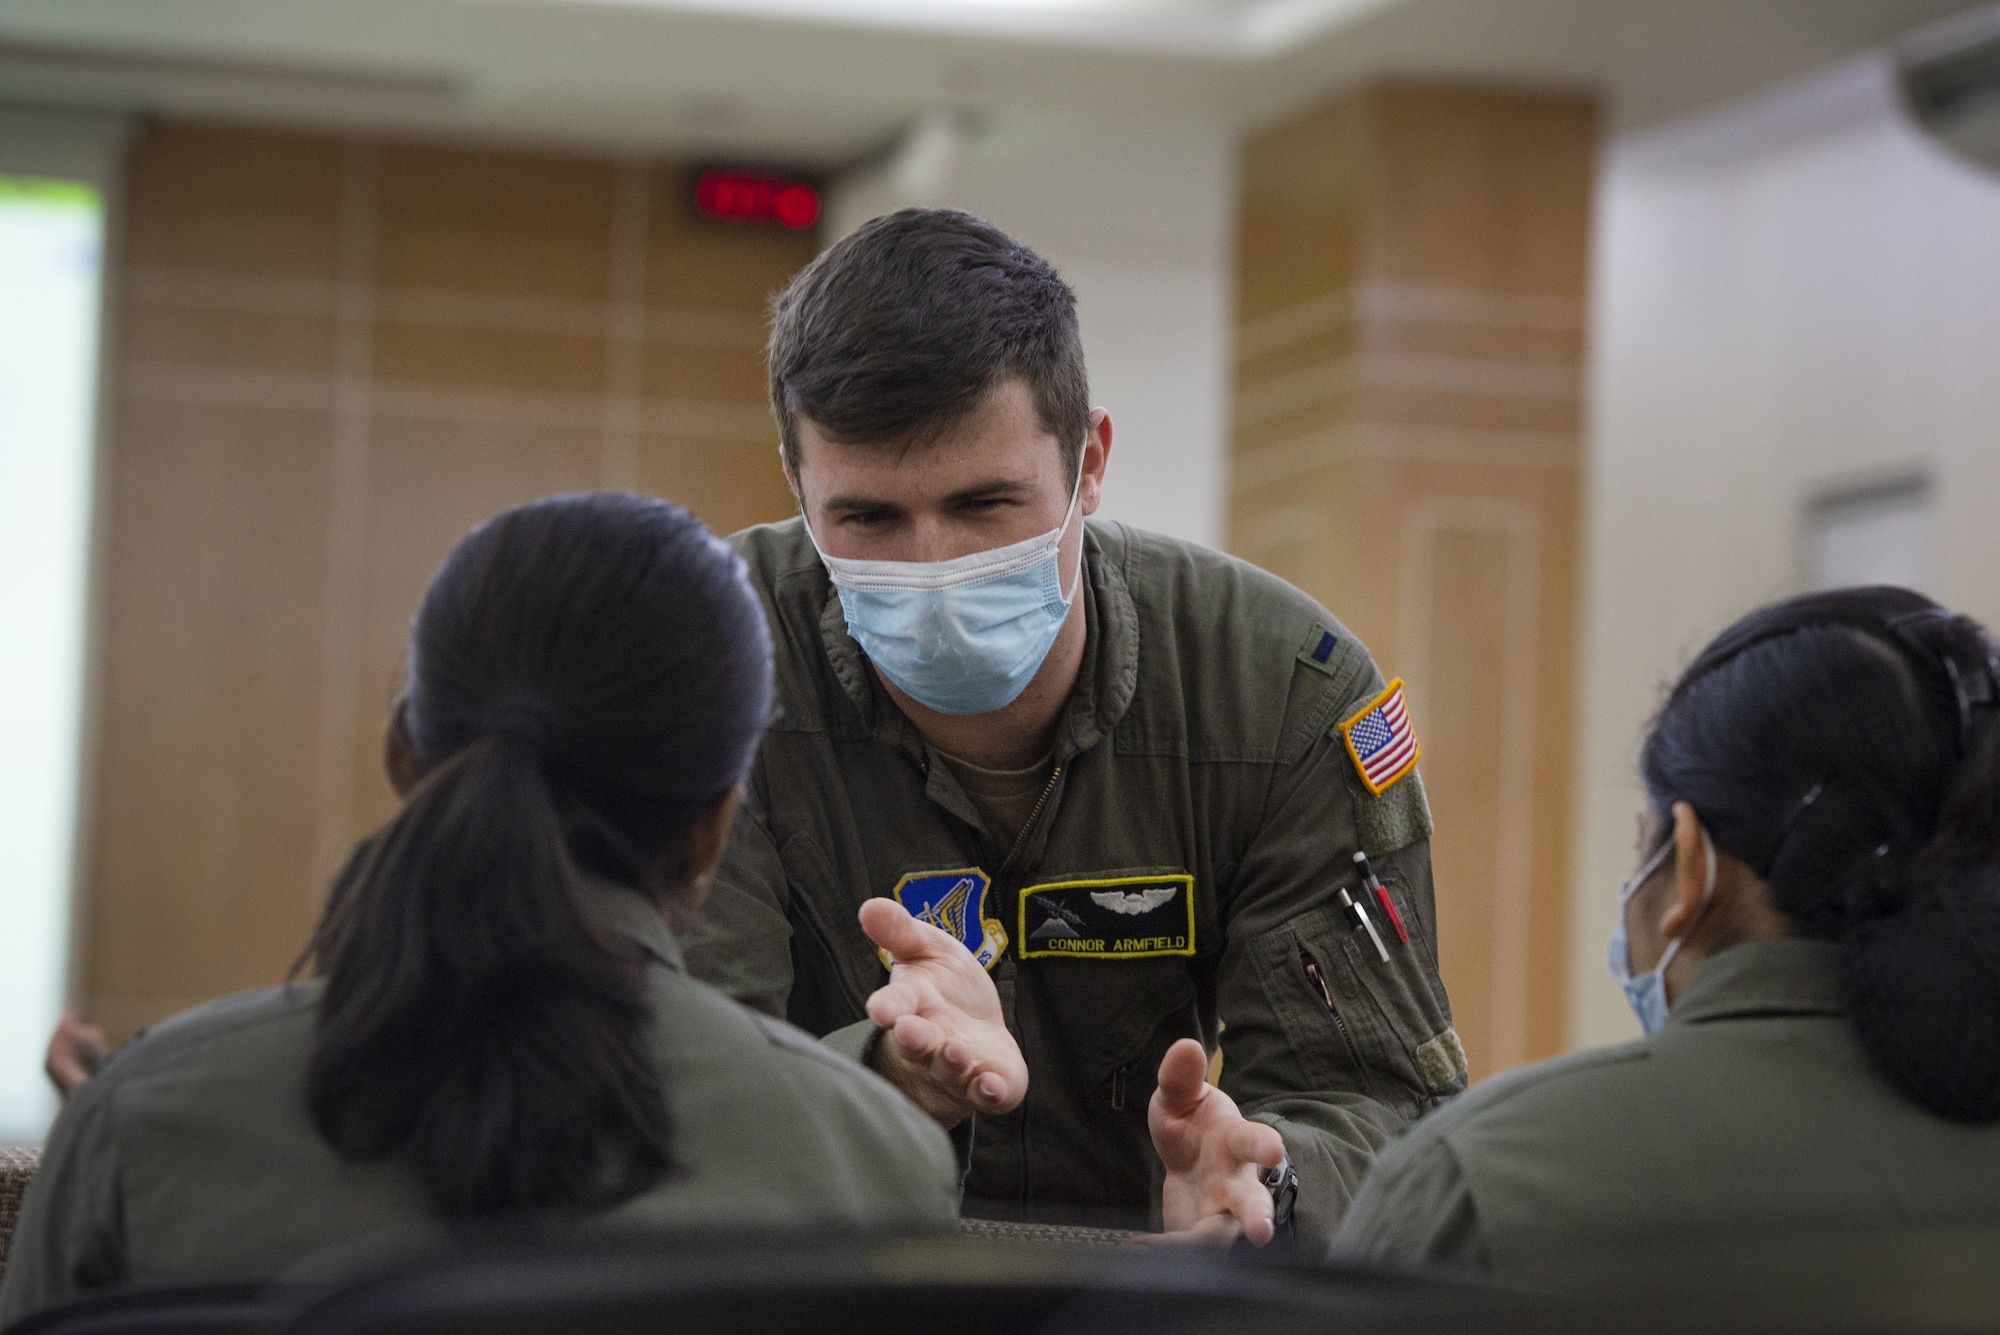 U.S. Air Force 1st Lt Connor Armfield, center, 36th Expeditionary Airlift Squadron C-130J Super Hercules pilot, talks to Bangladesh air force aircrew during a subject matter exchange event as part of Exercise Cope South 2022, Feb. 19, 2022, at BAF Kurmitola Cantonment, Bangladesh. Discussions during the SME event included best practices on low level flight, aircrew flight equipment nomenclature, C-130J Super Hercules capabilities and crew resource management. Exercise Cope South is a Pacific Air Forces-sponsored bilateral tactical airlift exercise designed to enhance the interoperability between the U.S. Air Force and BAF. (U.S. Air Force photo by Tech. Sgt. Christopher Hubenthal)